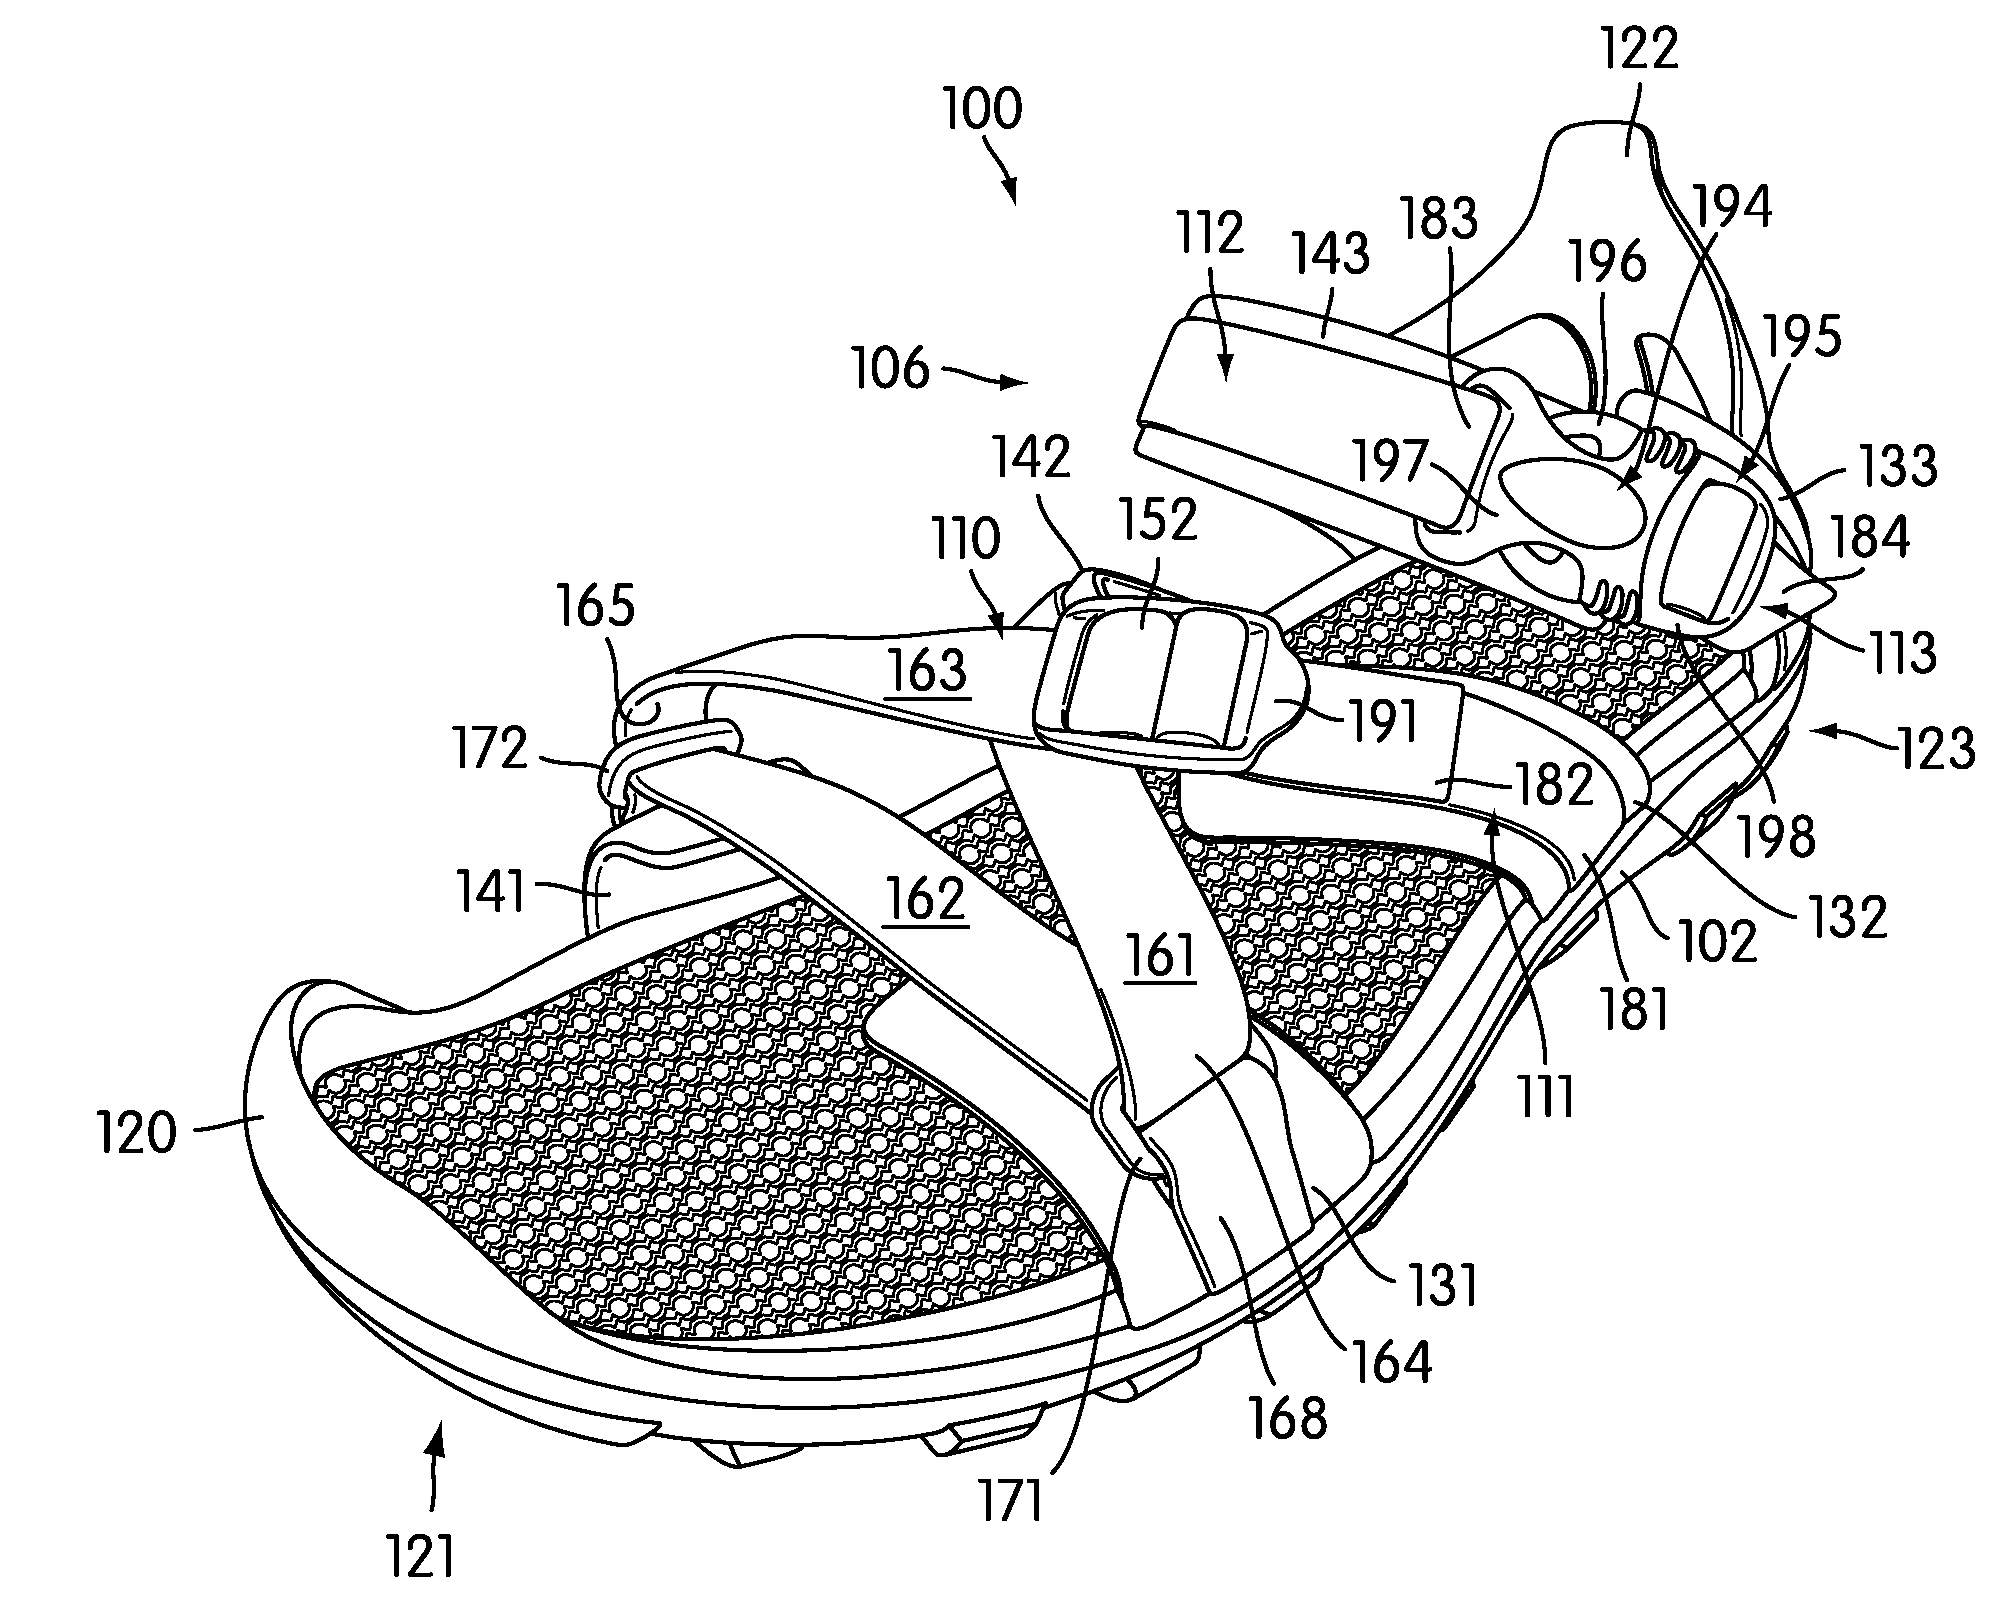 Article of Footwear with Mesh on Outsole and Insert